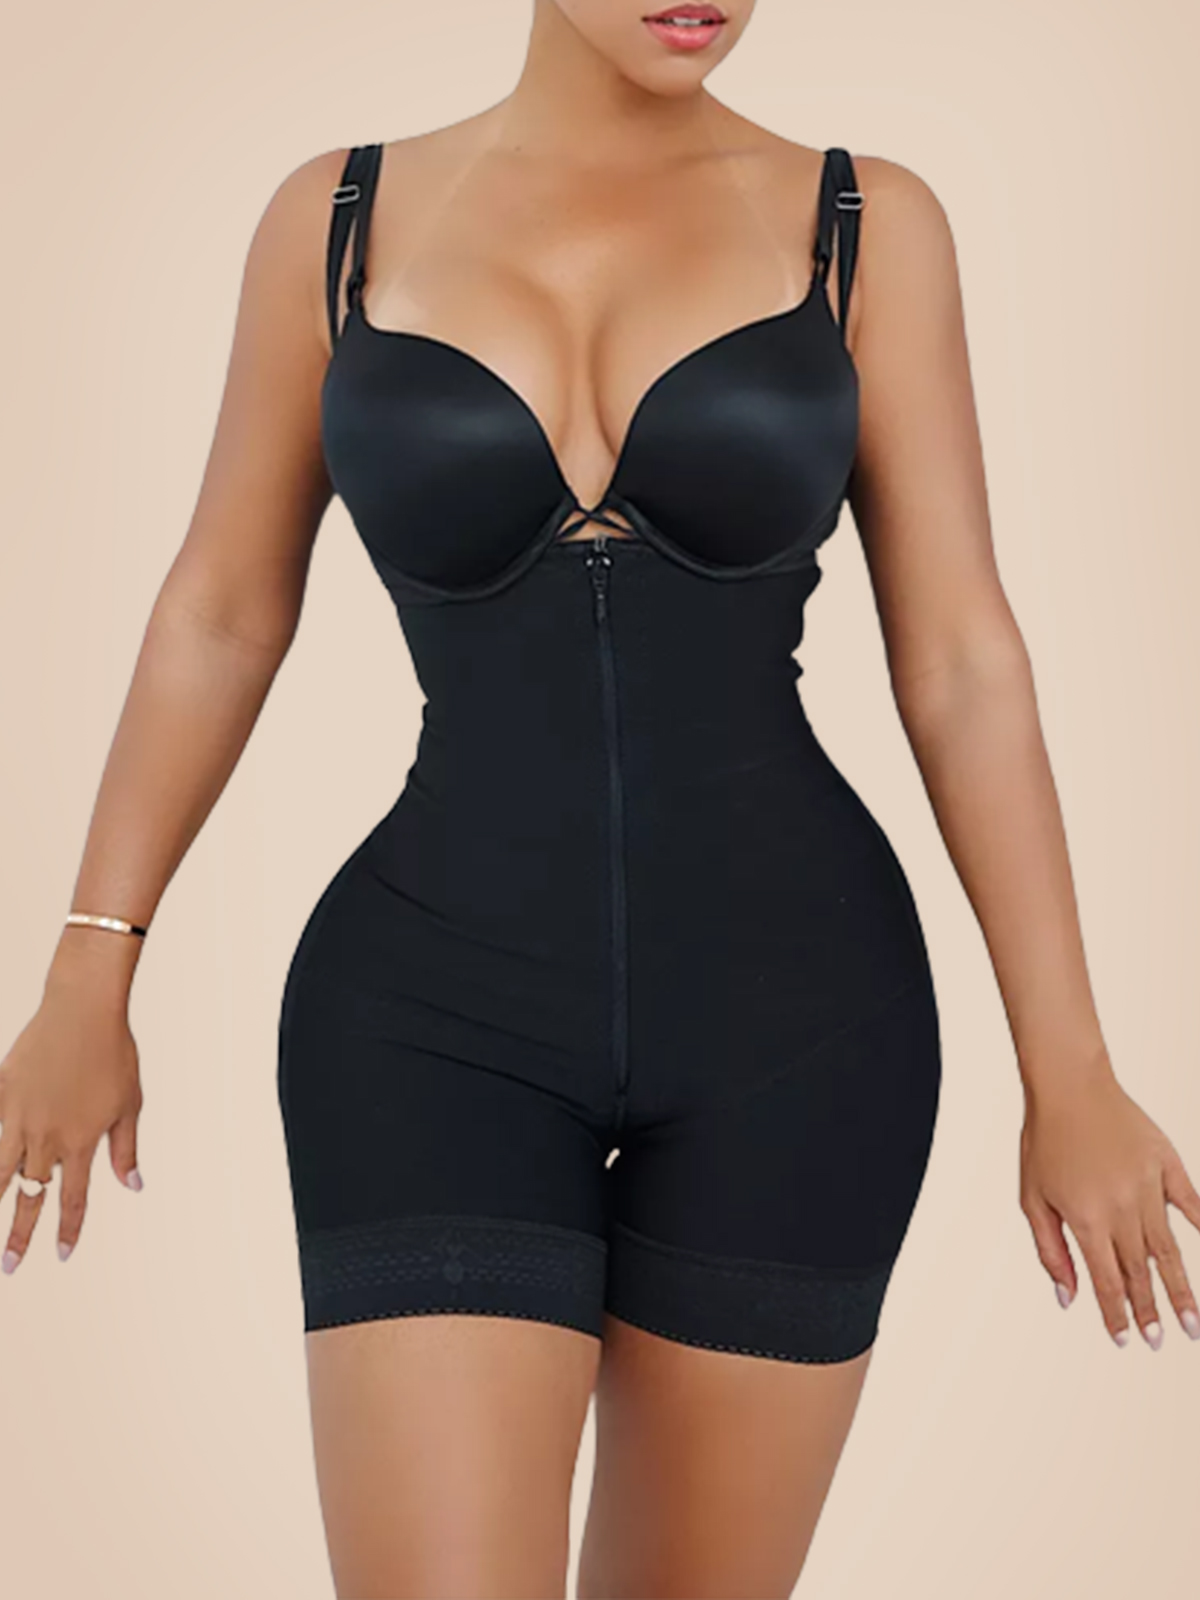 Slimming Waist Trainer Zipper Body Shaper Underbust Corset With Straps For Women Tummy Control Low-Back